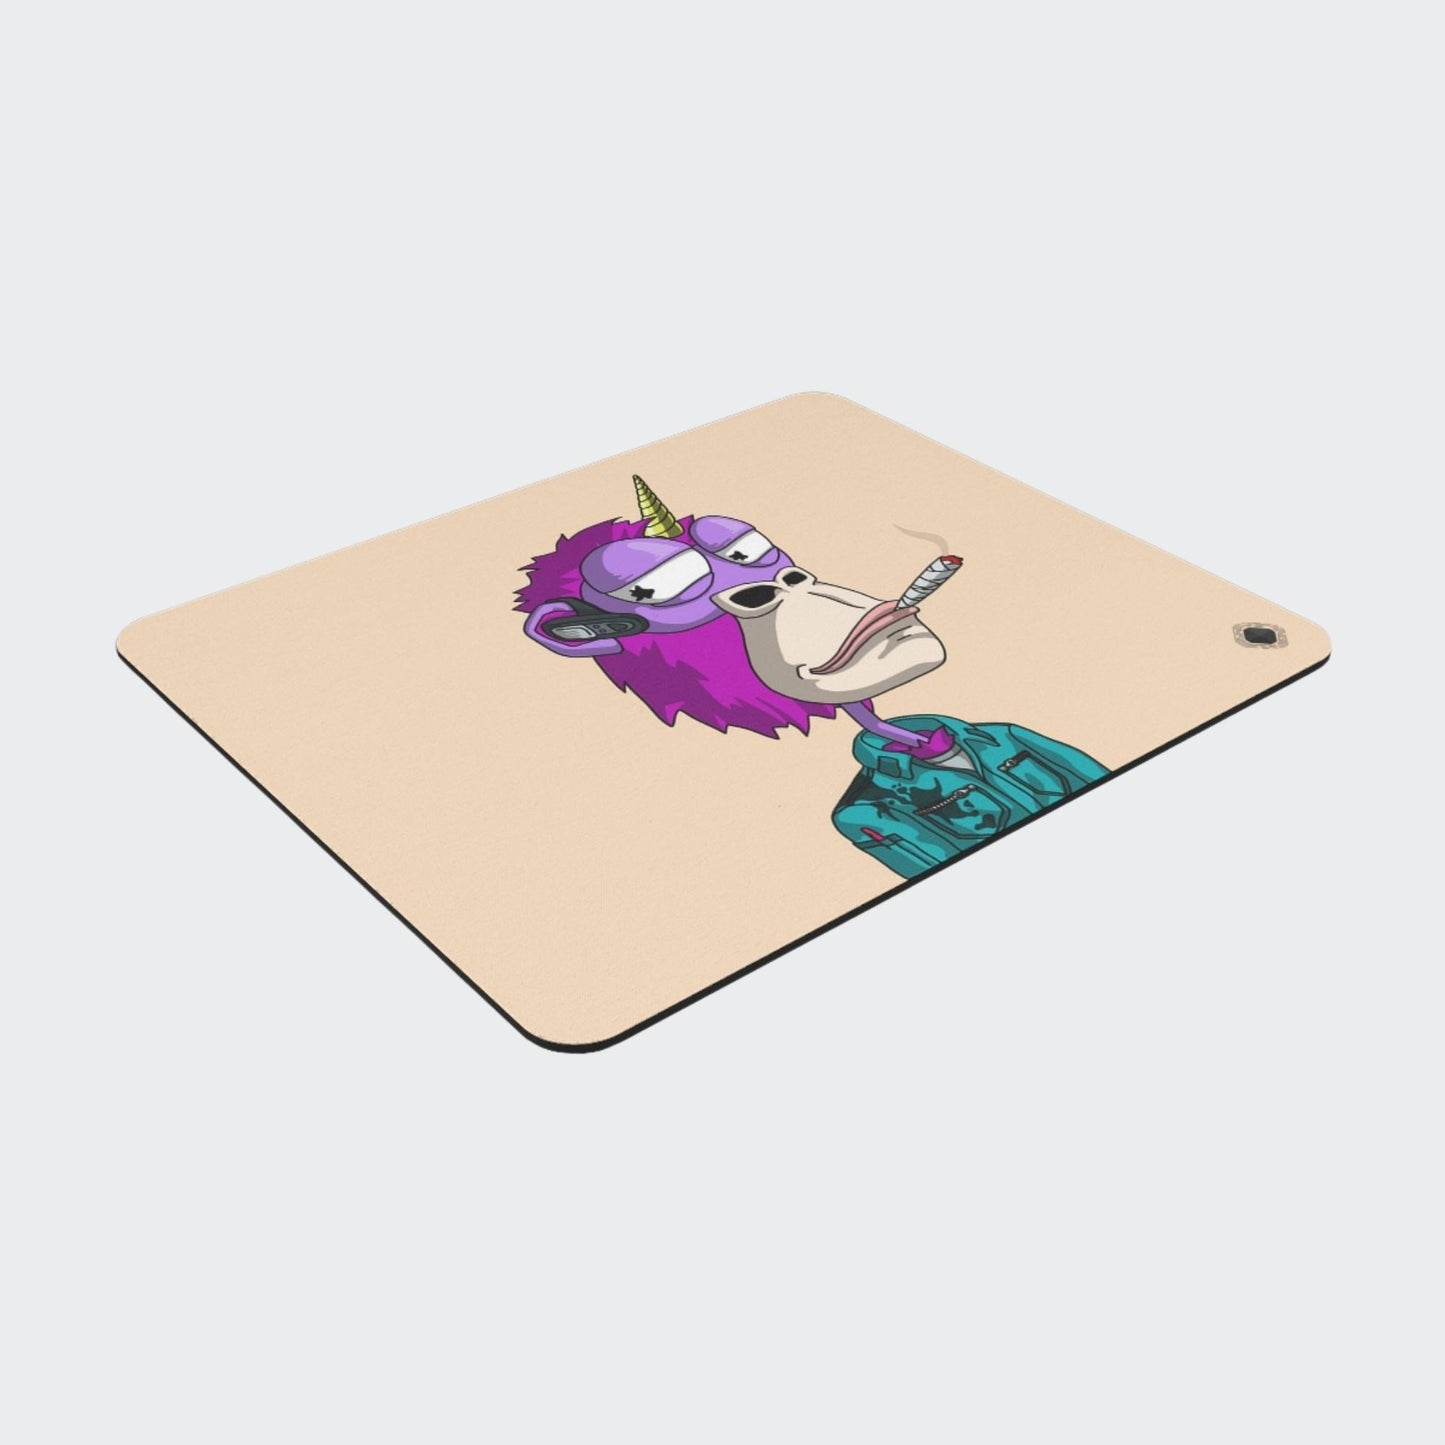 Touchable Mouse Pad